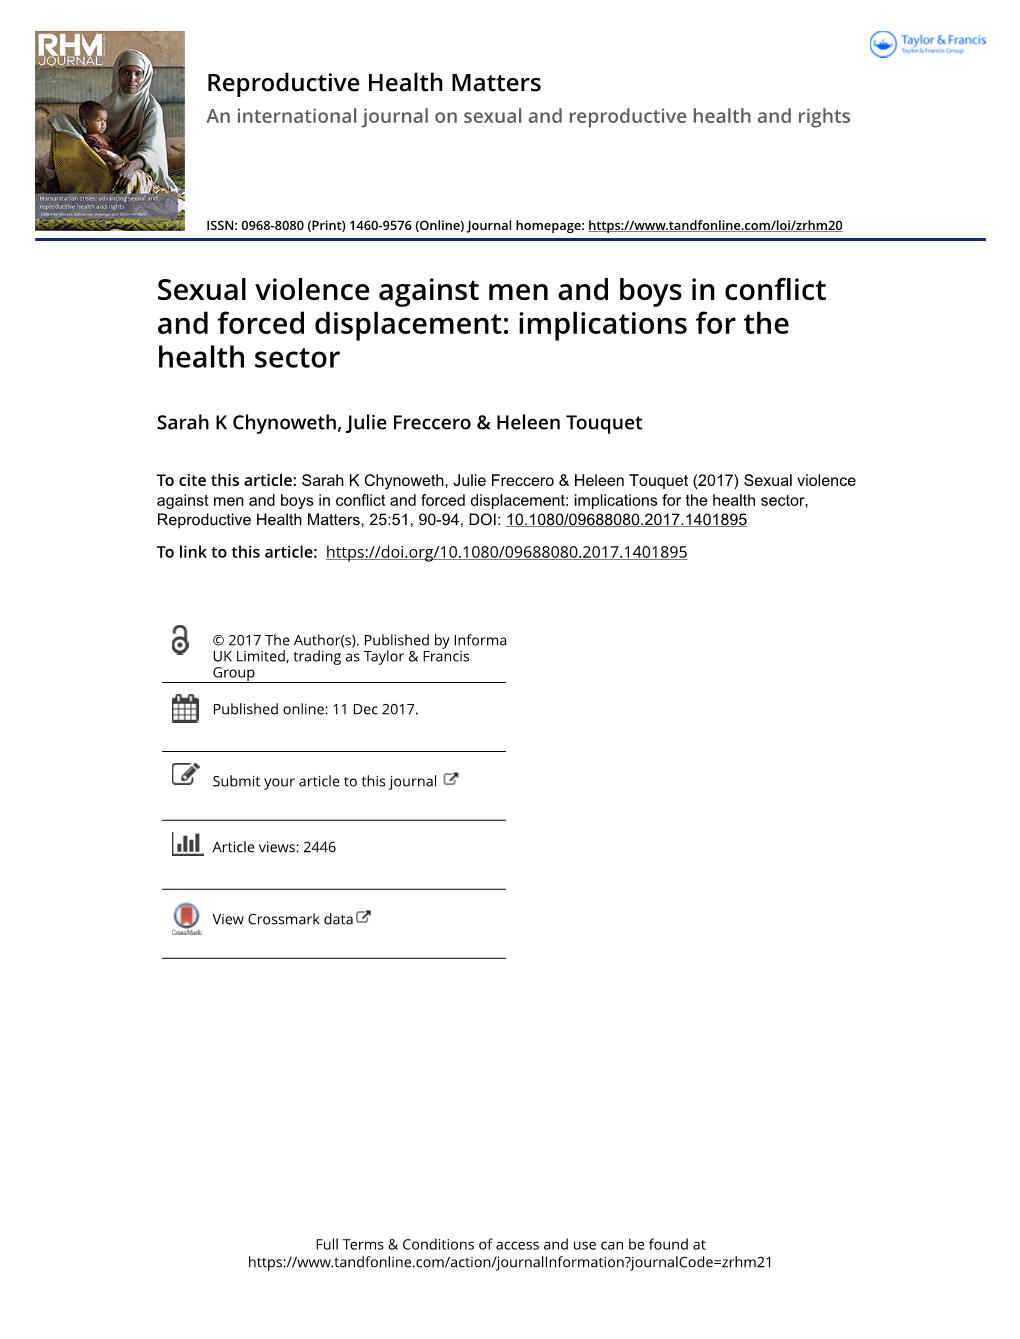 Sexual Violence Against Men and Boys in Conflict and Forced Displacement: Implications for the Health Sector